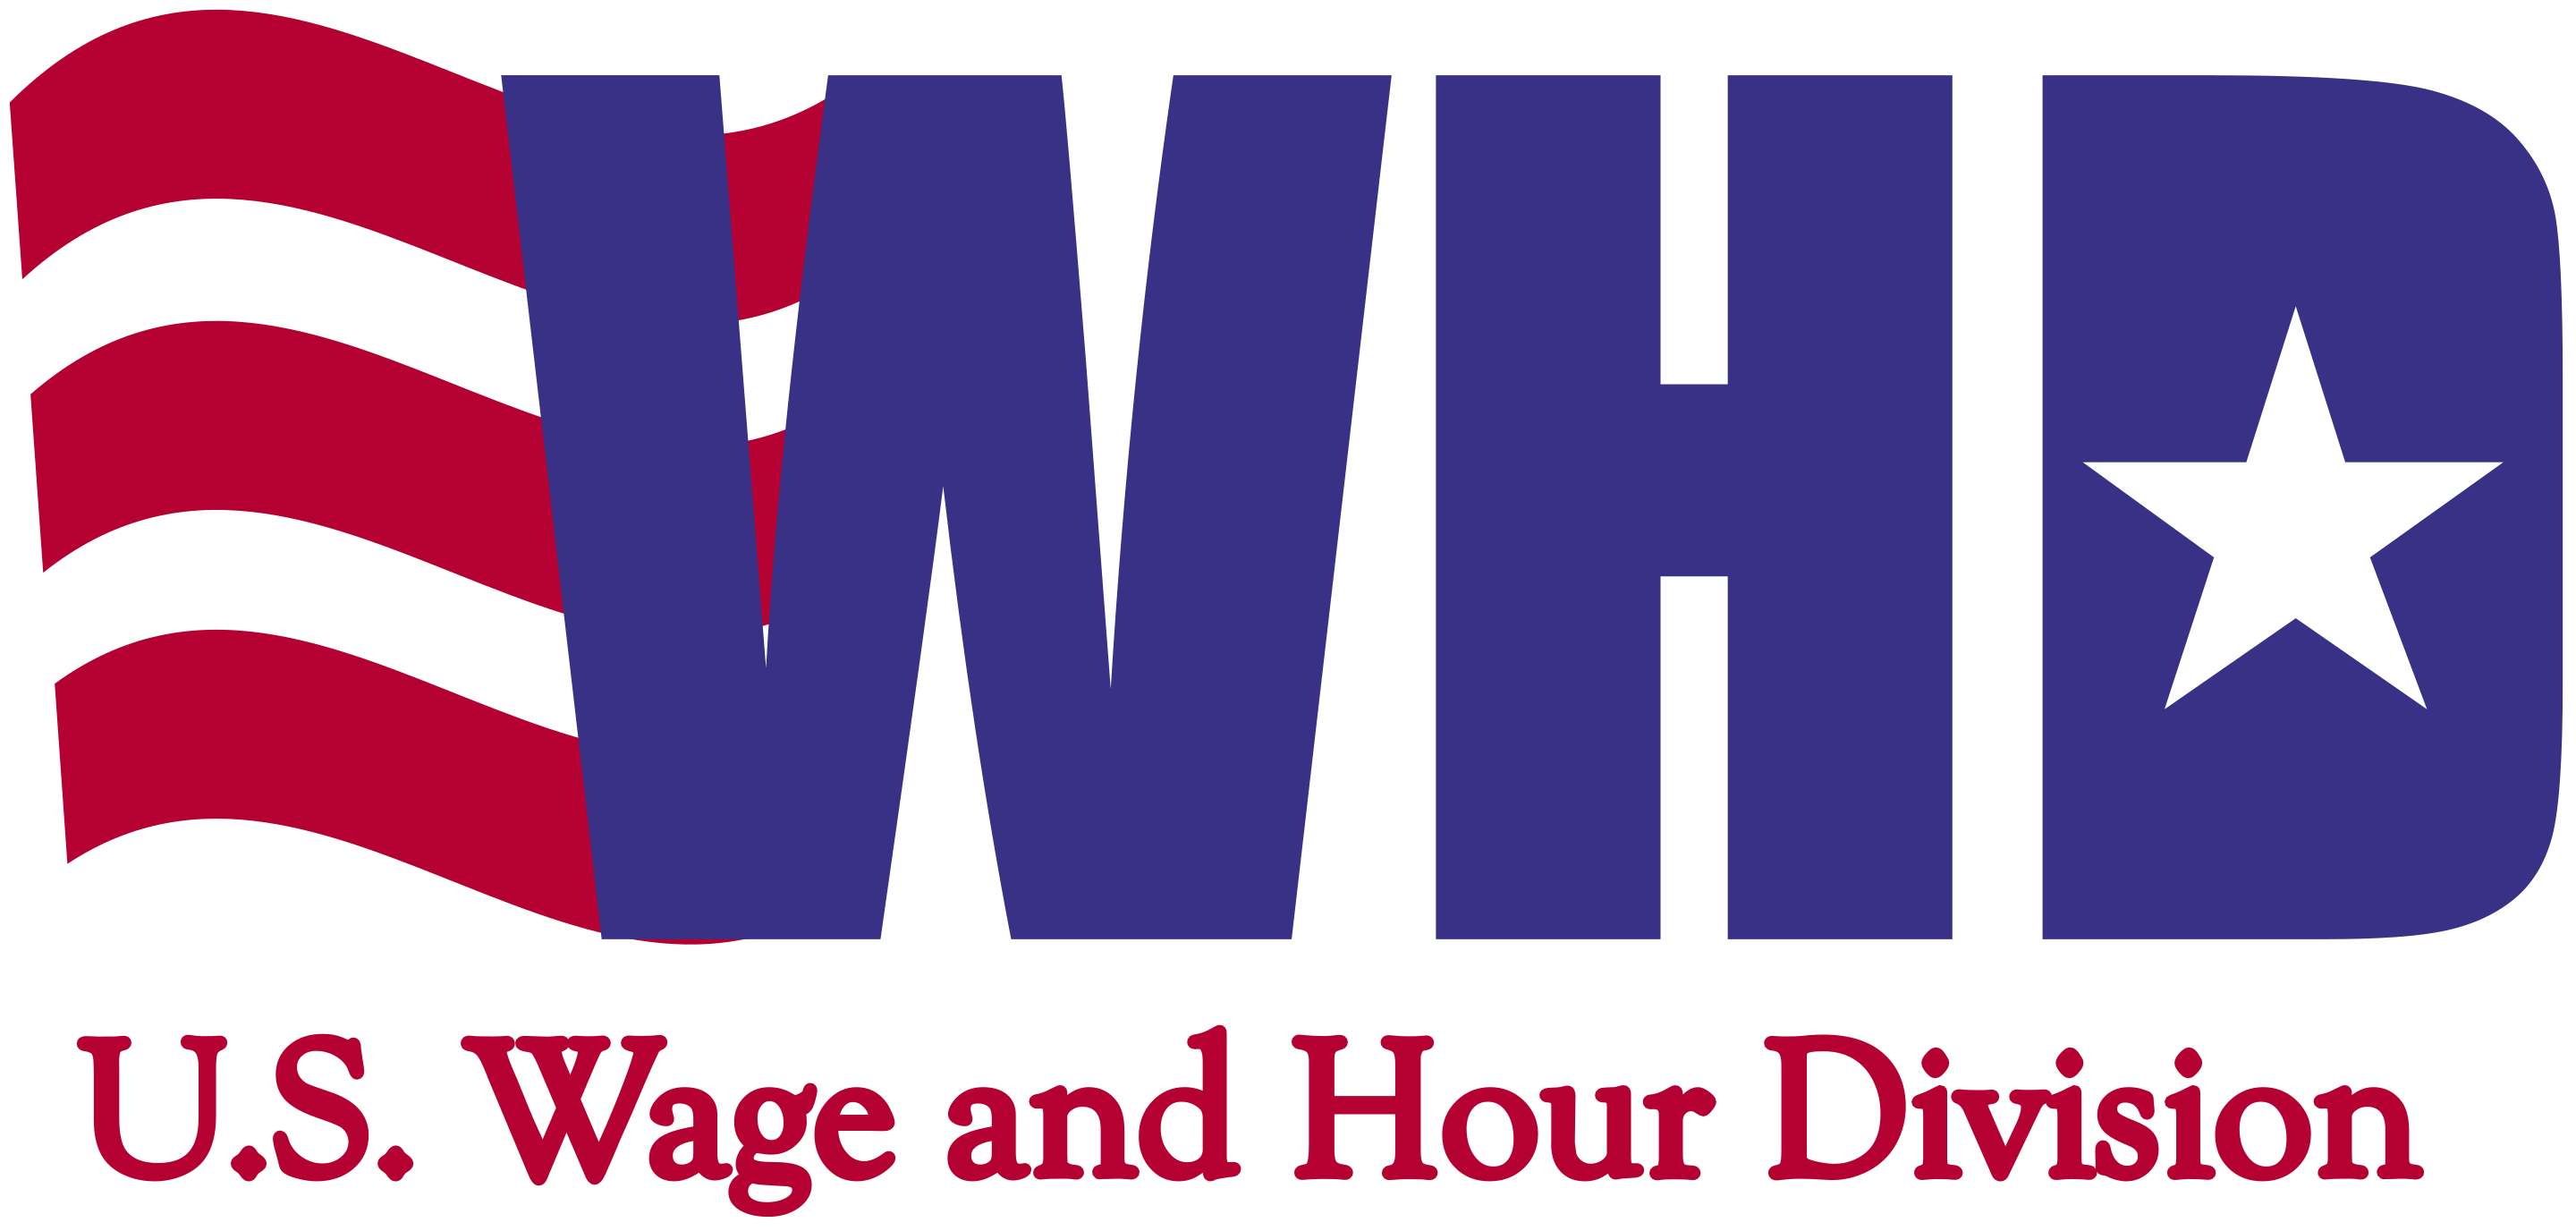 U.S. Wage and Hour Division